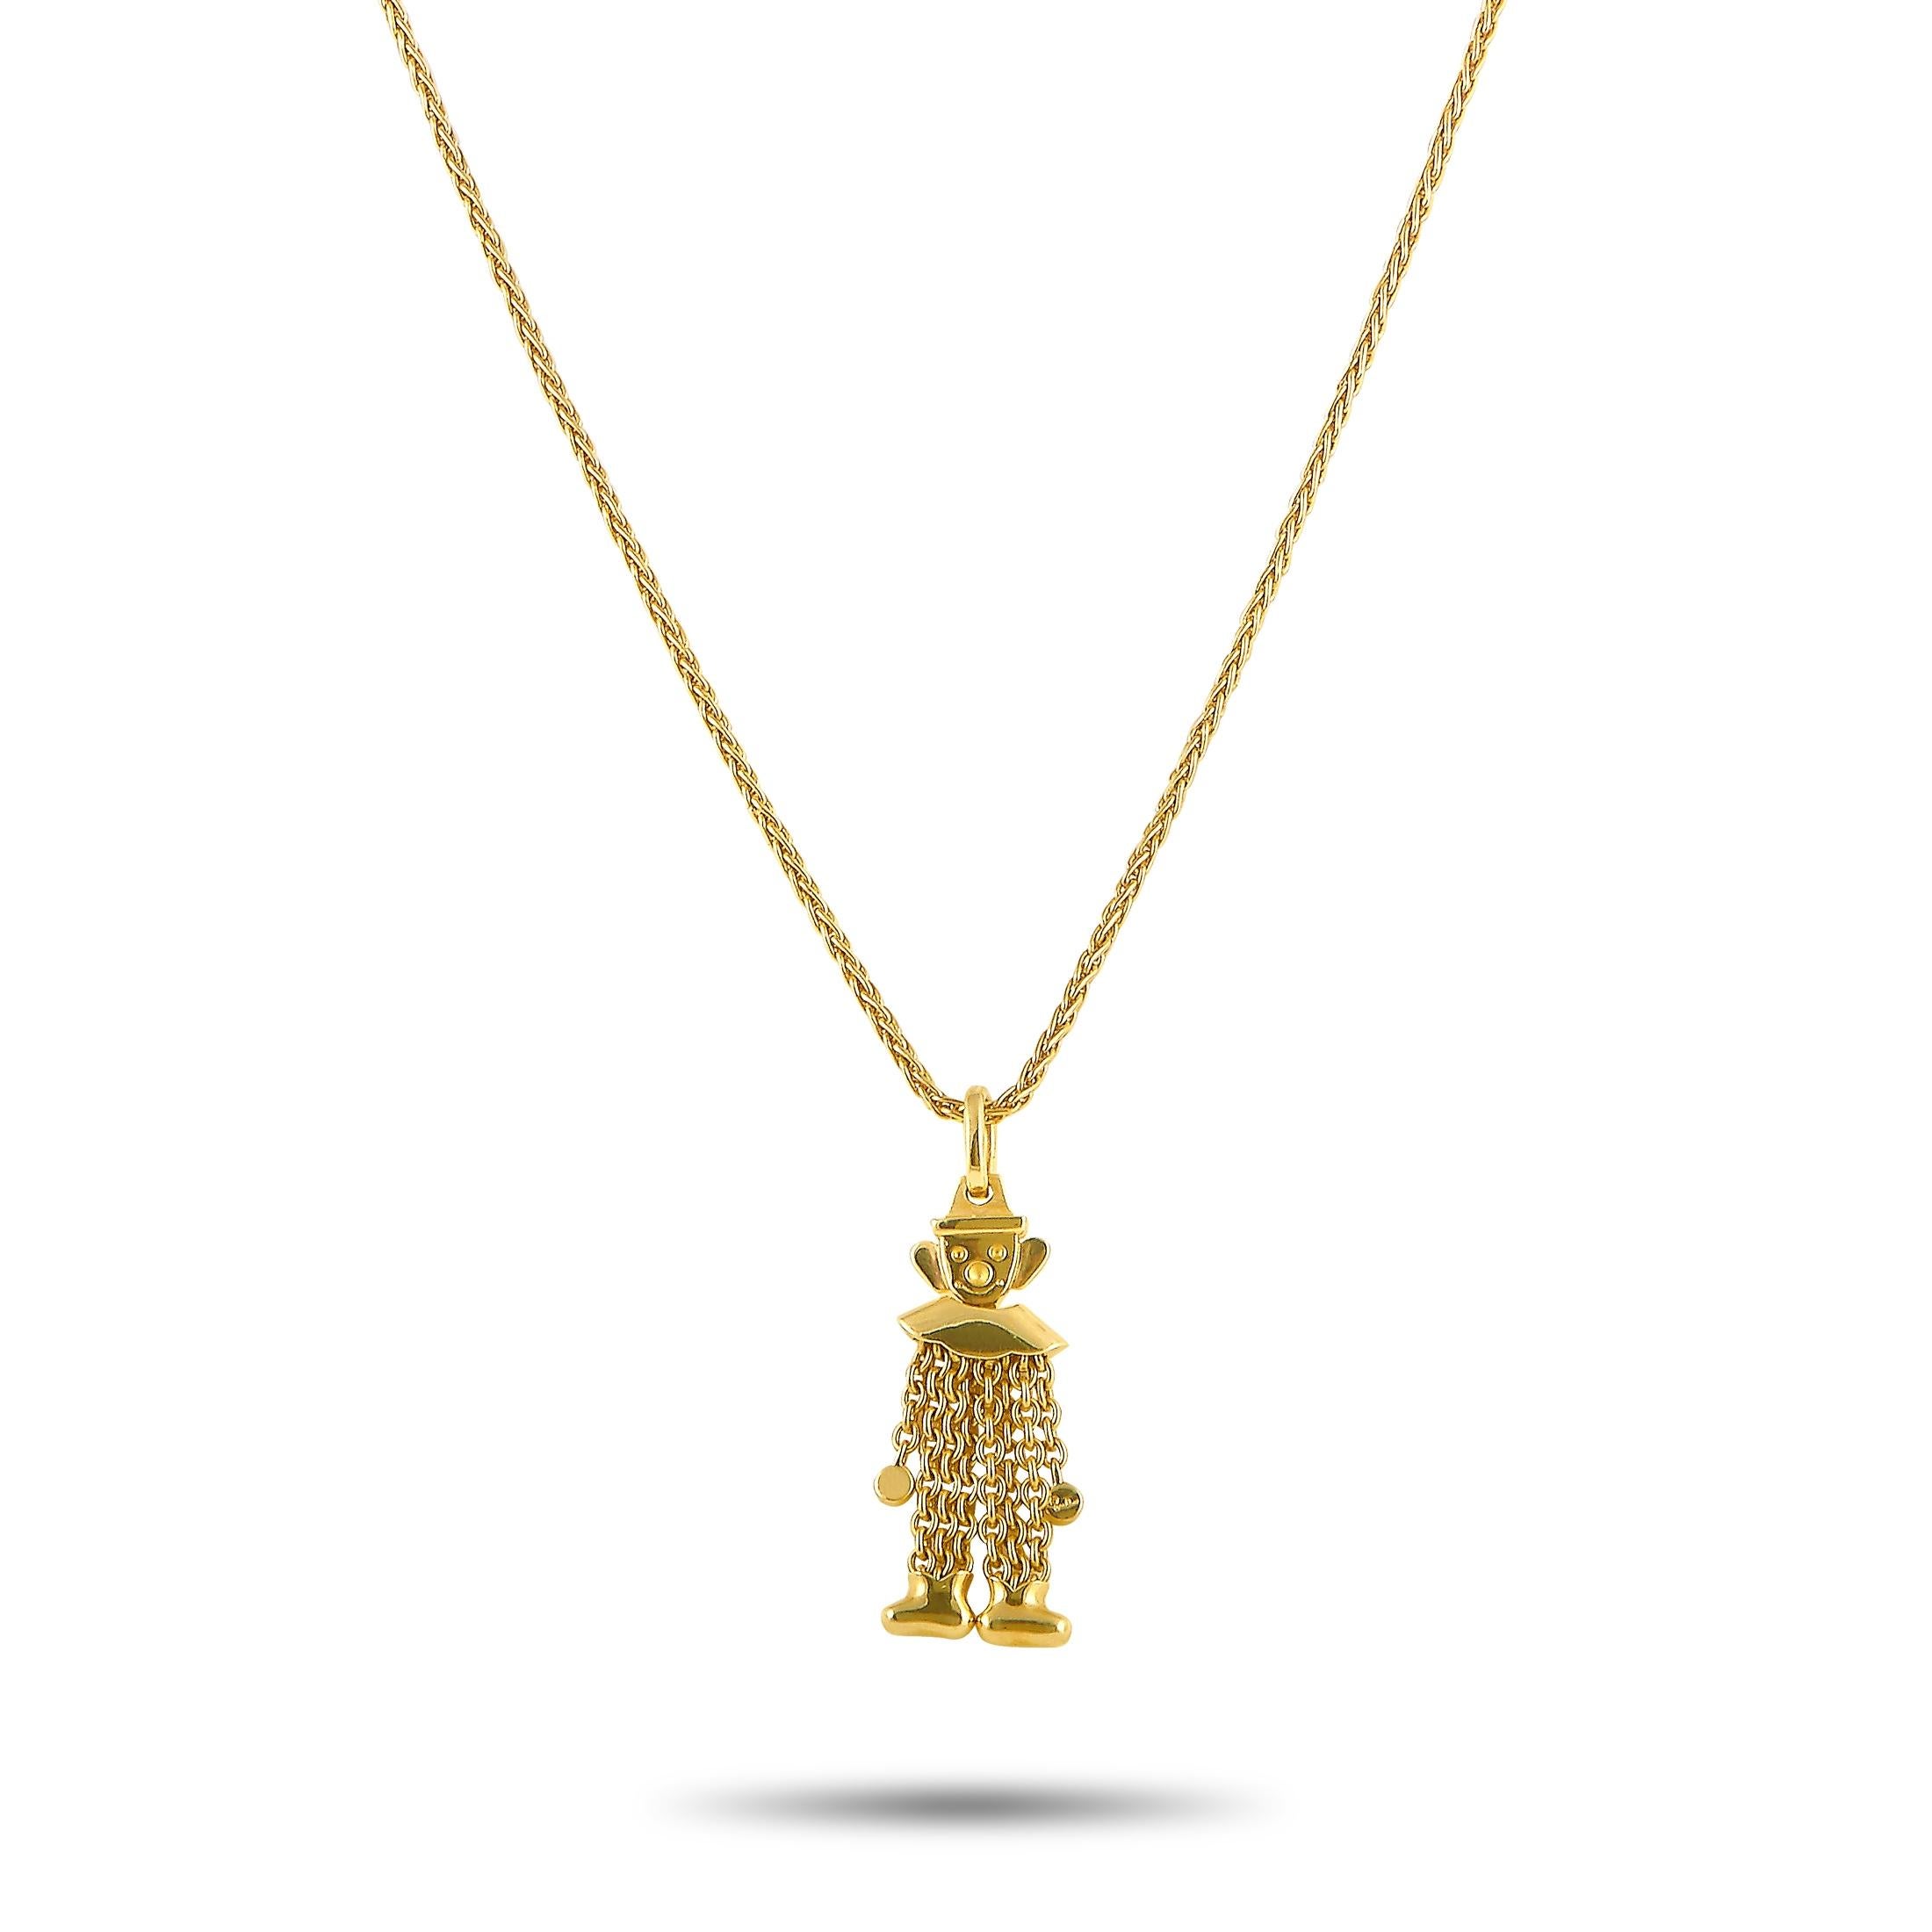 This Pomellato necklace is made of 18K yellow gold and weighs 25 grams. The necklace is presented with a 16” chain and a clown pendant that measures 2” in length and 0.50” in width.
 
 Offered in estate condition, this jewelry piece includes the